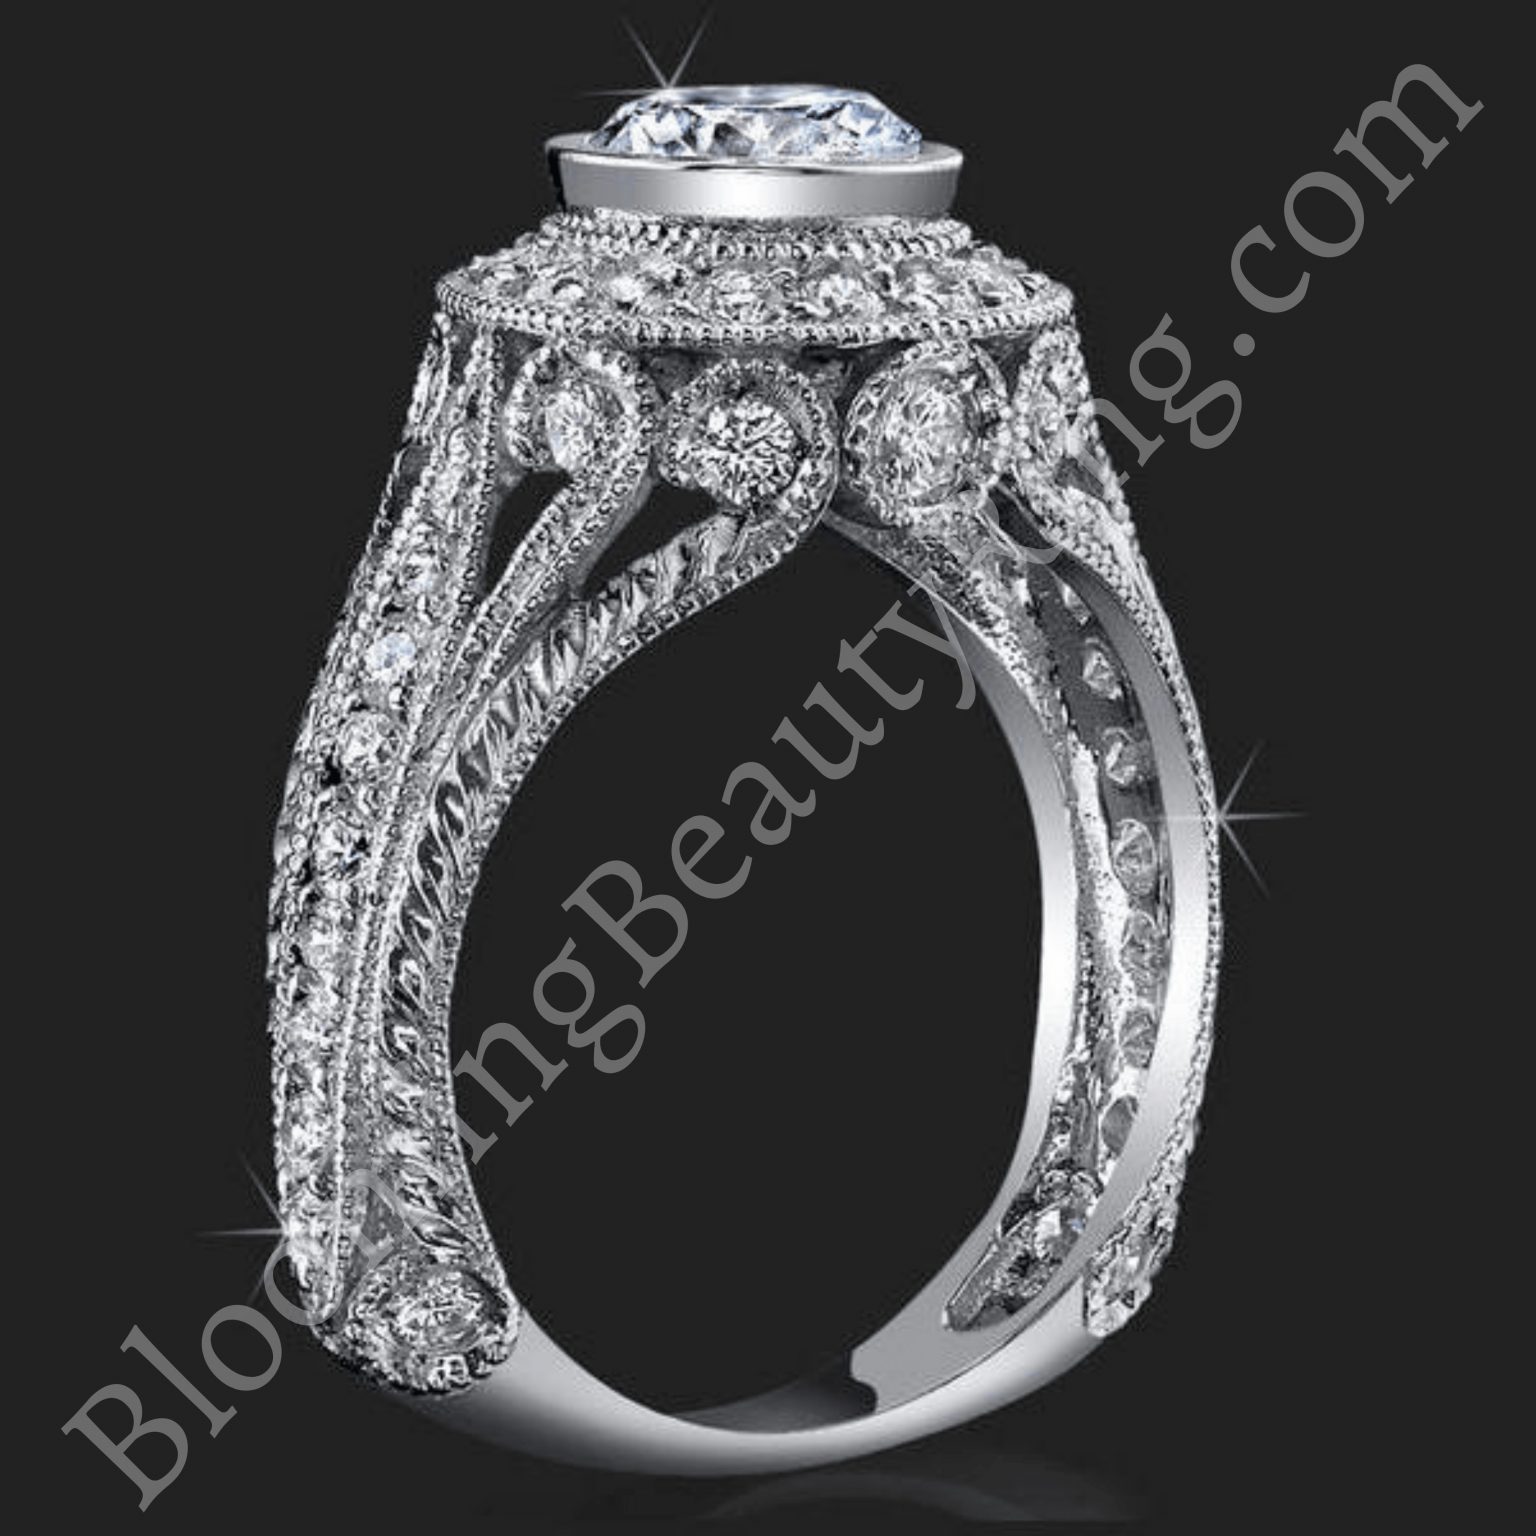 Head Turning Bezel Set Vintage Queen with Stylish Antique Qualities and Unsurpassed Beauty